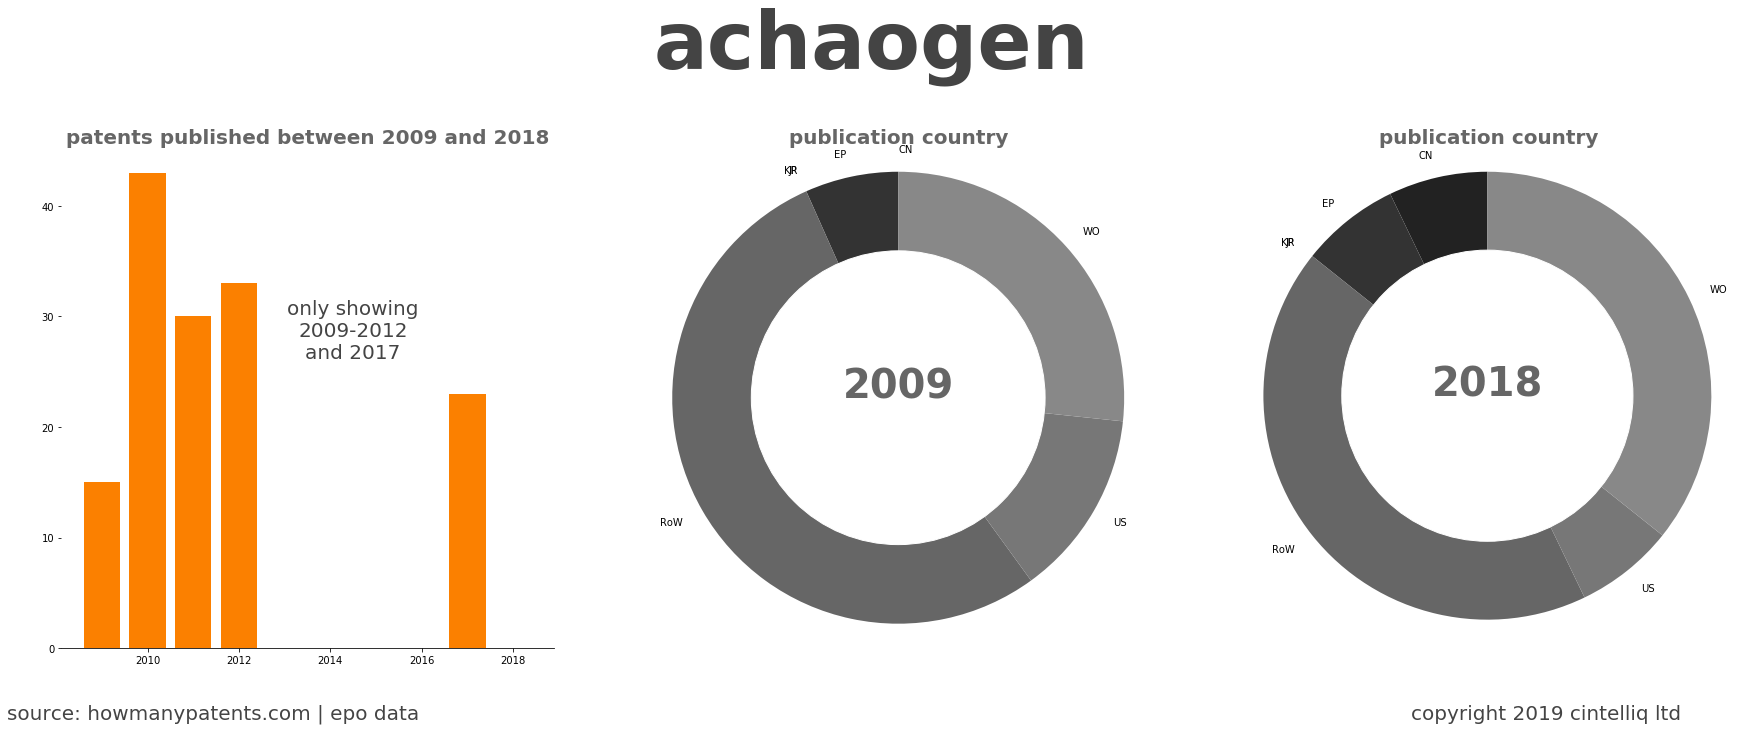 summary of patents for Achaogen